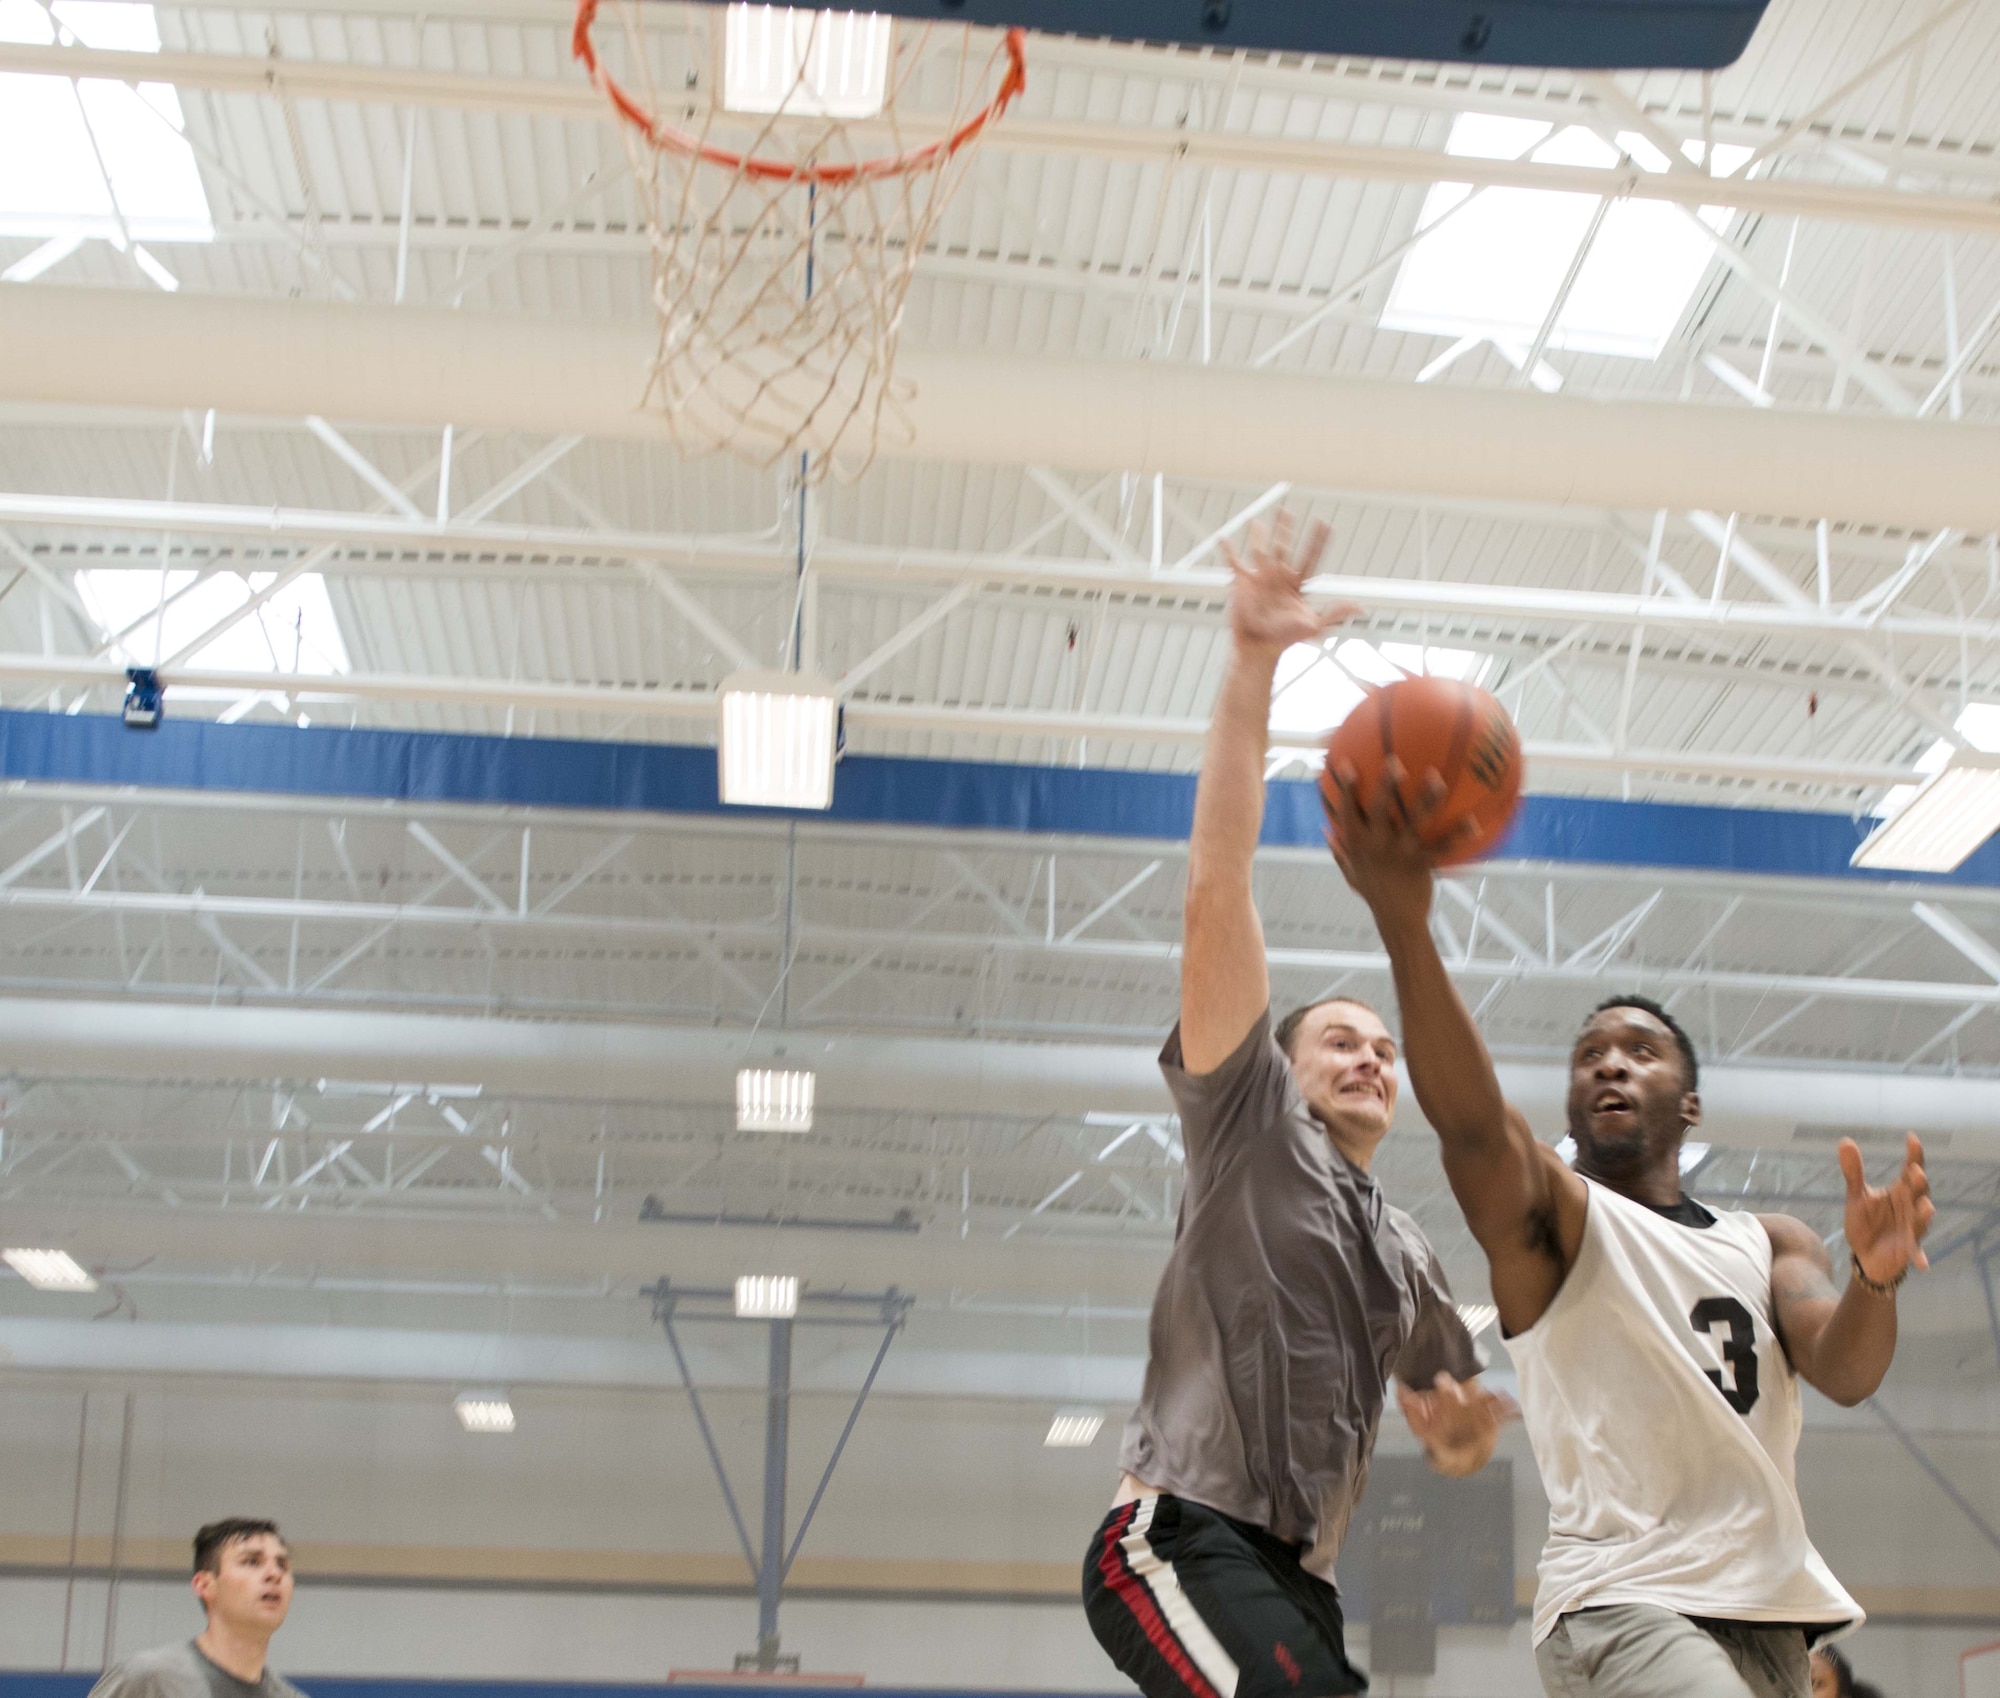 Team Shaw members compete during the Four Chaplains 3-on-3 Basketball Tournament at the 20th Force Support Squadron main fitness center at Shaw Air Force Base, S.C., June 15, 2018.